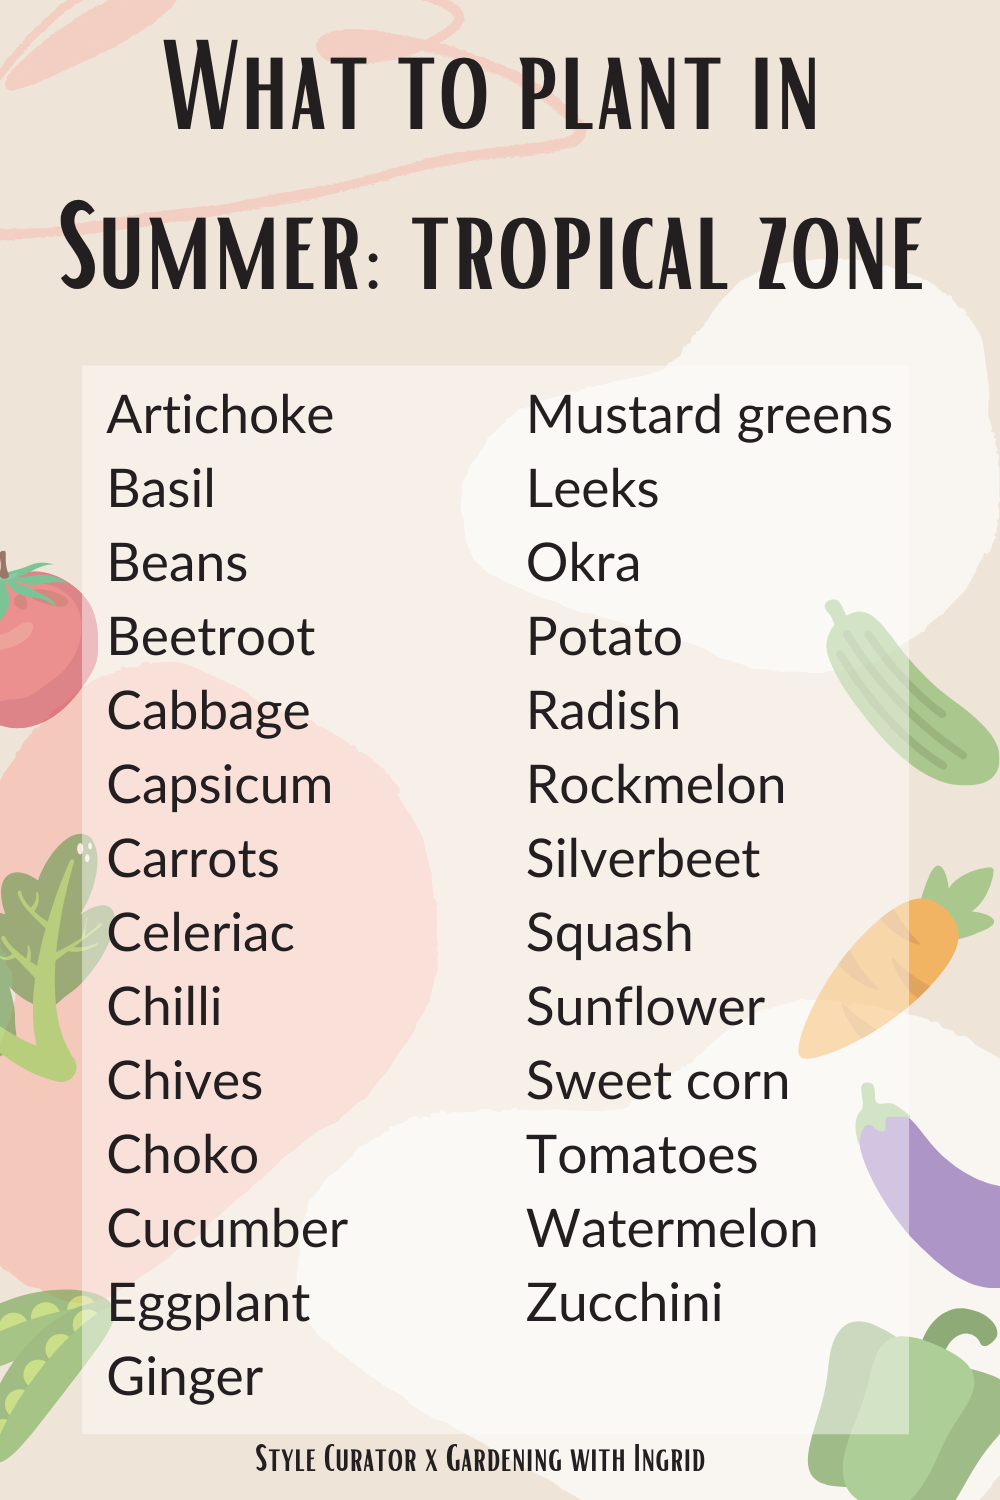 What to plant in Summer in Australia - tropical zone